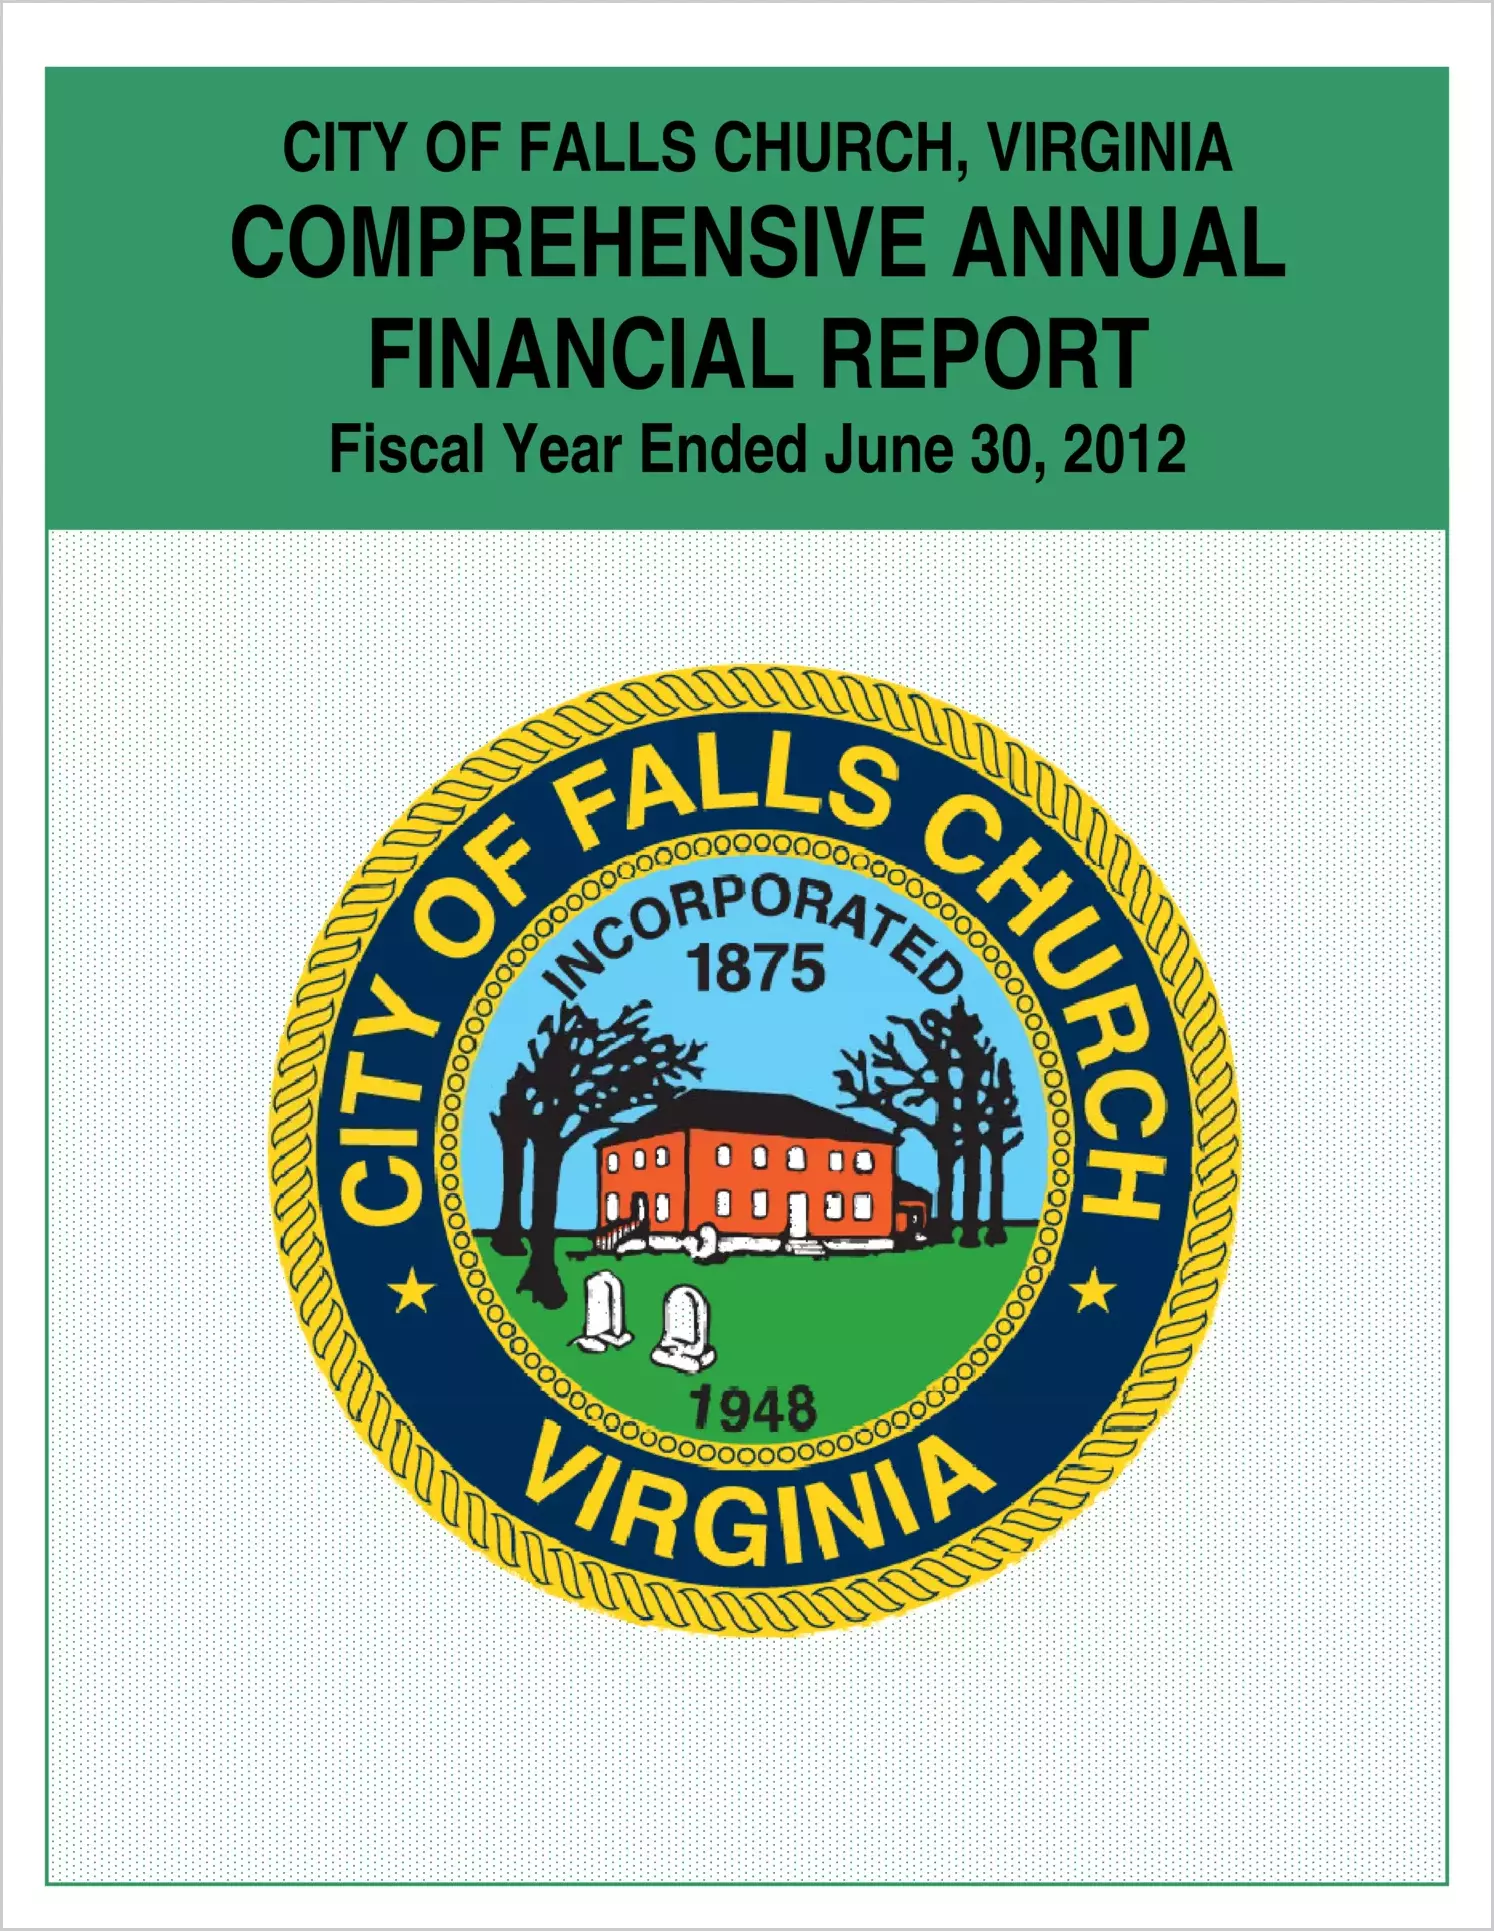 2012 Annual Financial Report for City of Falls Church